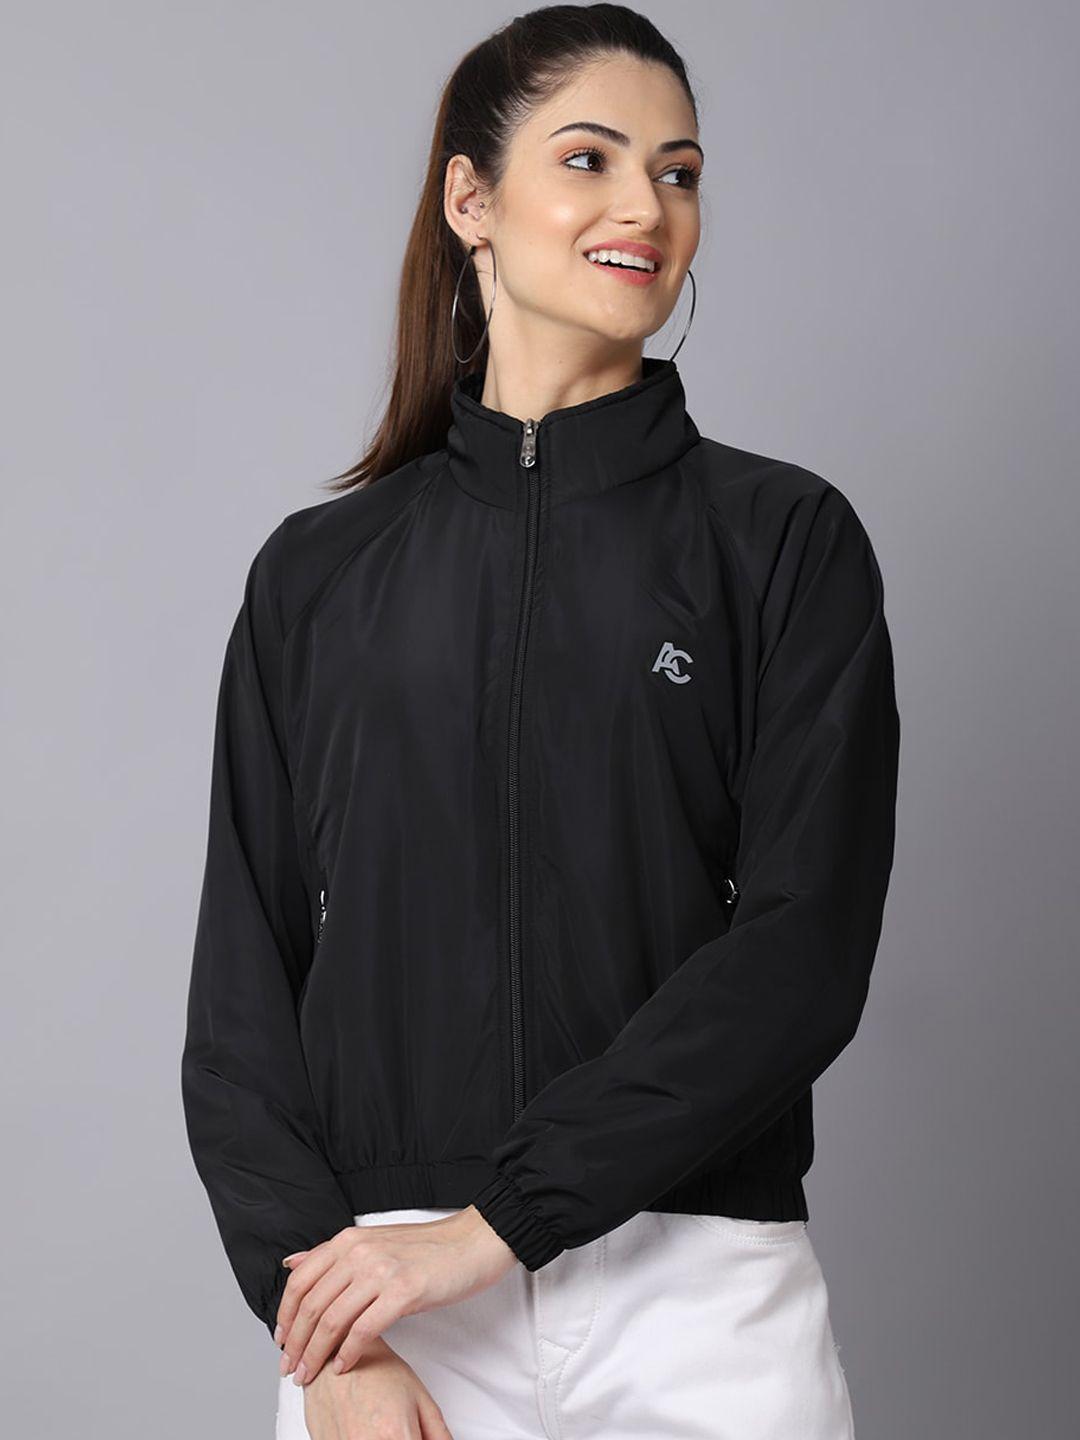 anti culture women black raisin black colourblocked windcheater crop outdoor sporty jacket with embroidered